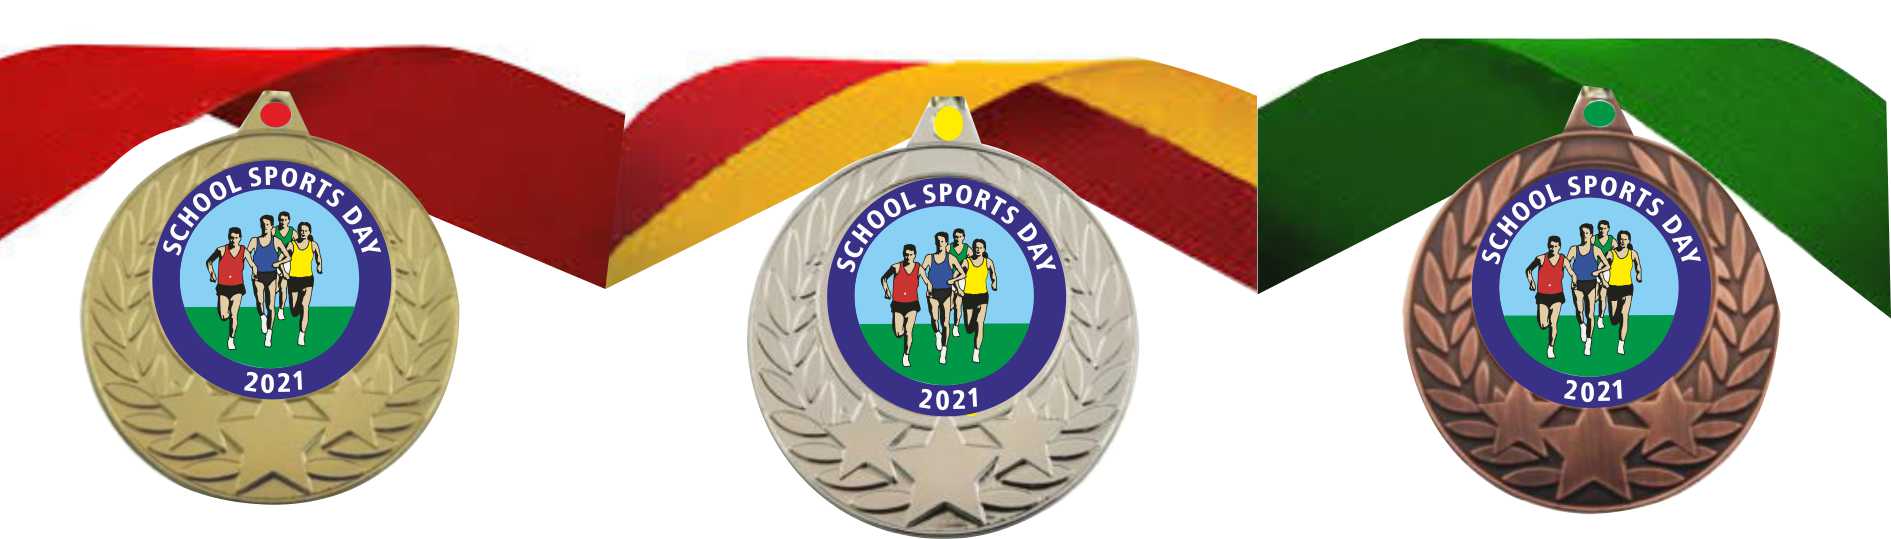 Sports Day Medals Free Ribbon 7050 2021 Year dated